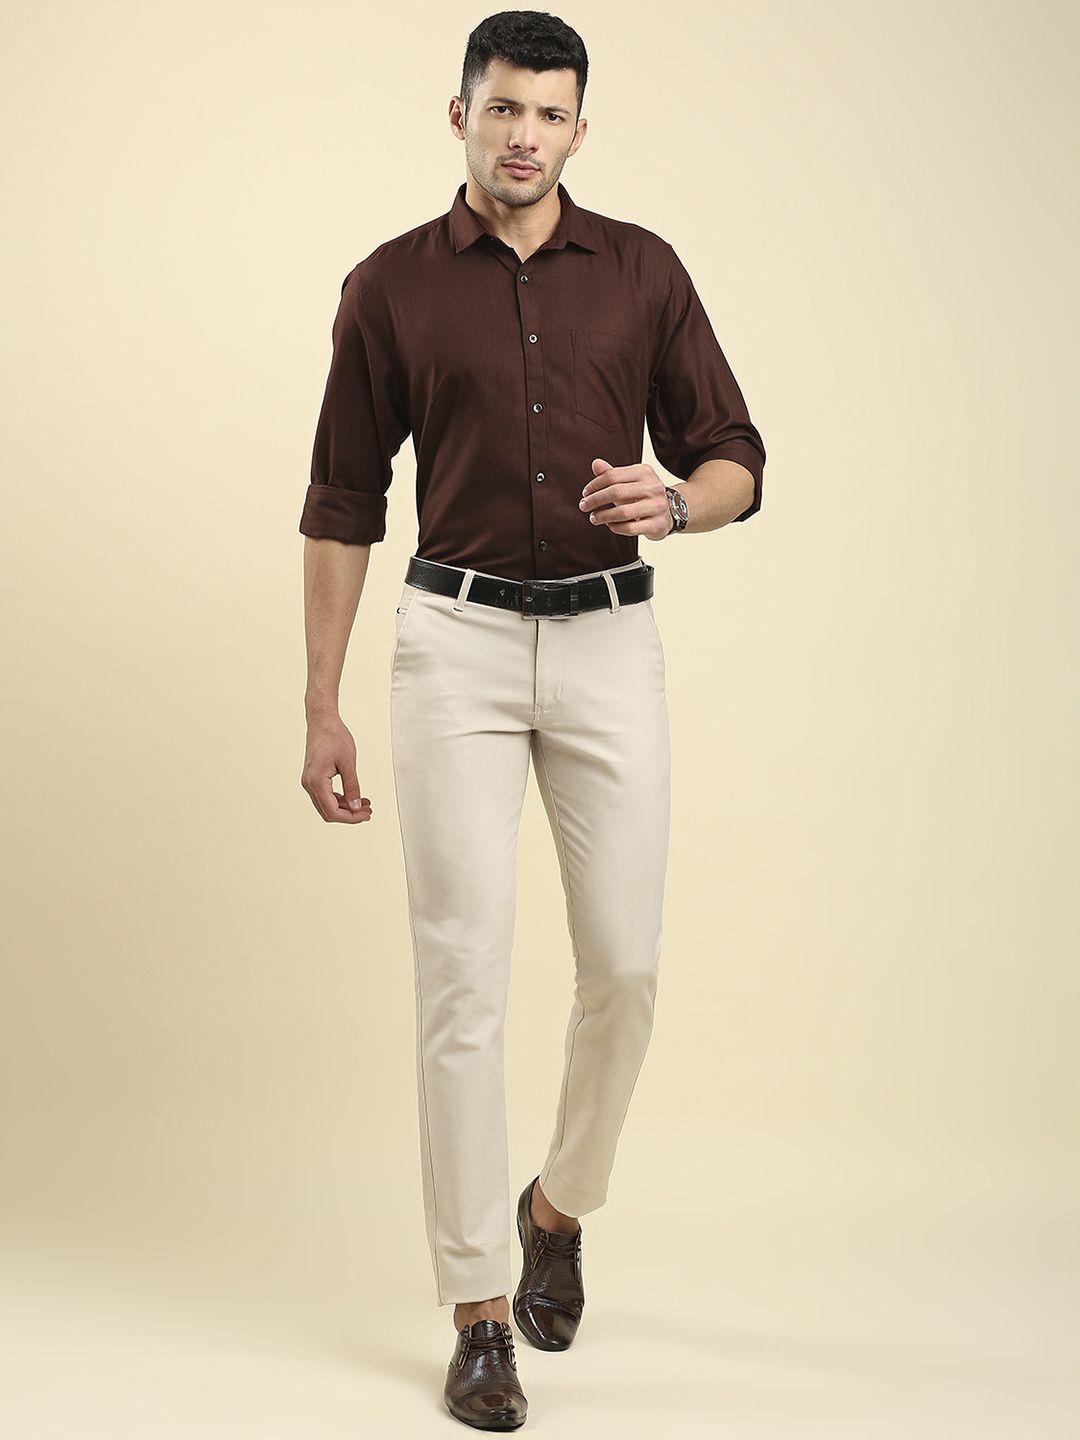 A Man in Brown Shirt and White Pants  Free Stock Photo